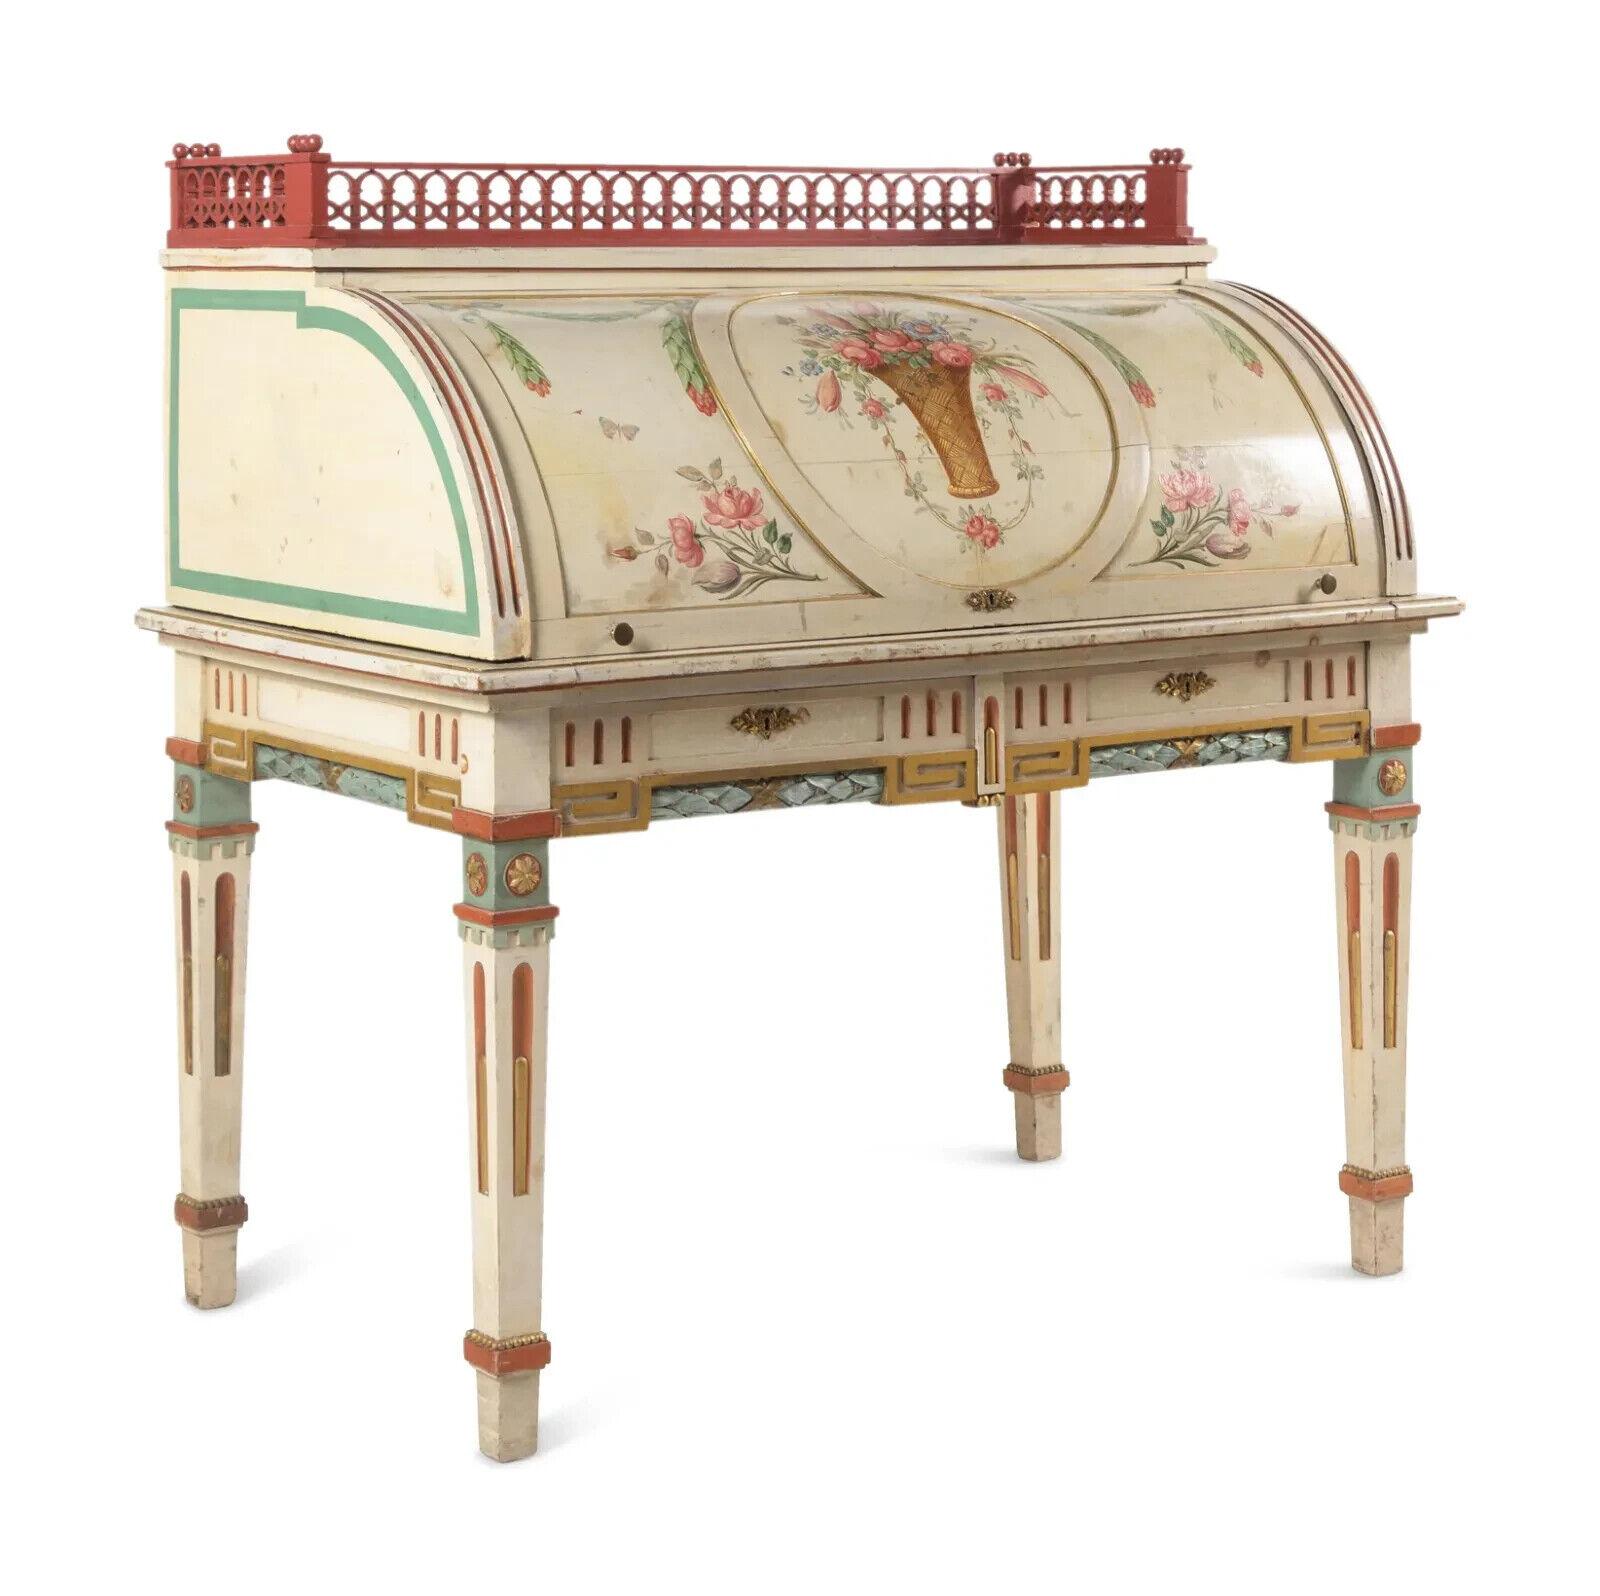 Gorgeous Antique Bureau, Writing Desk, Continental, Polychrome-Painted, Cylinder, circa 1900, Early 20th century!!

A Continental Polychrome-Painted Cylinder Bureau, Late 19th/Early 20th century, Height 51 1/2 x width 51 1/4 x depth 30